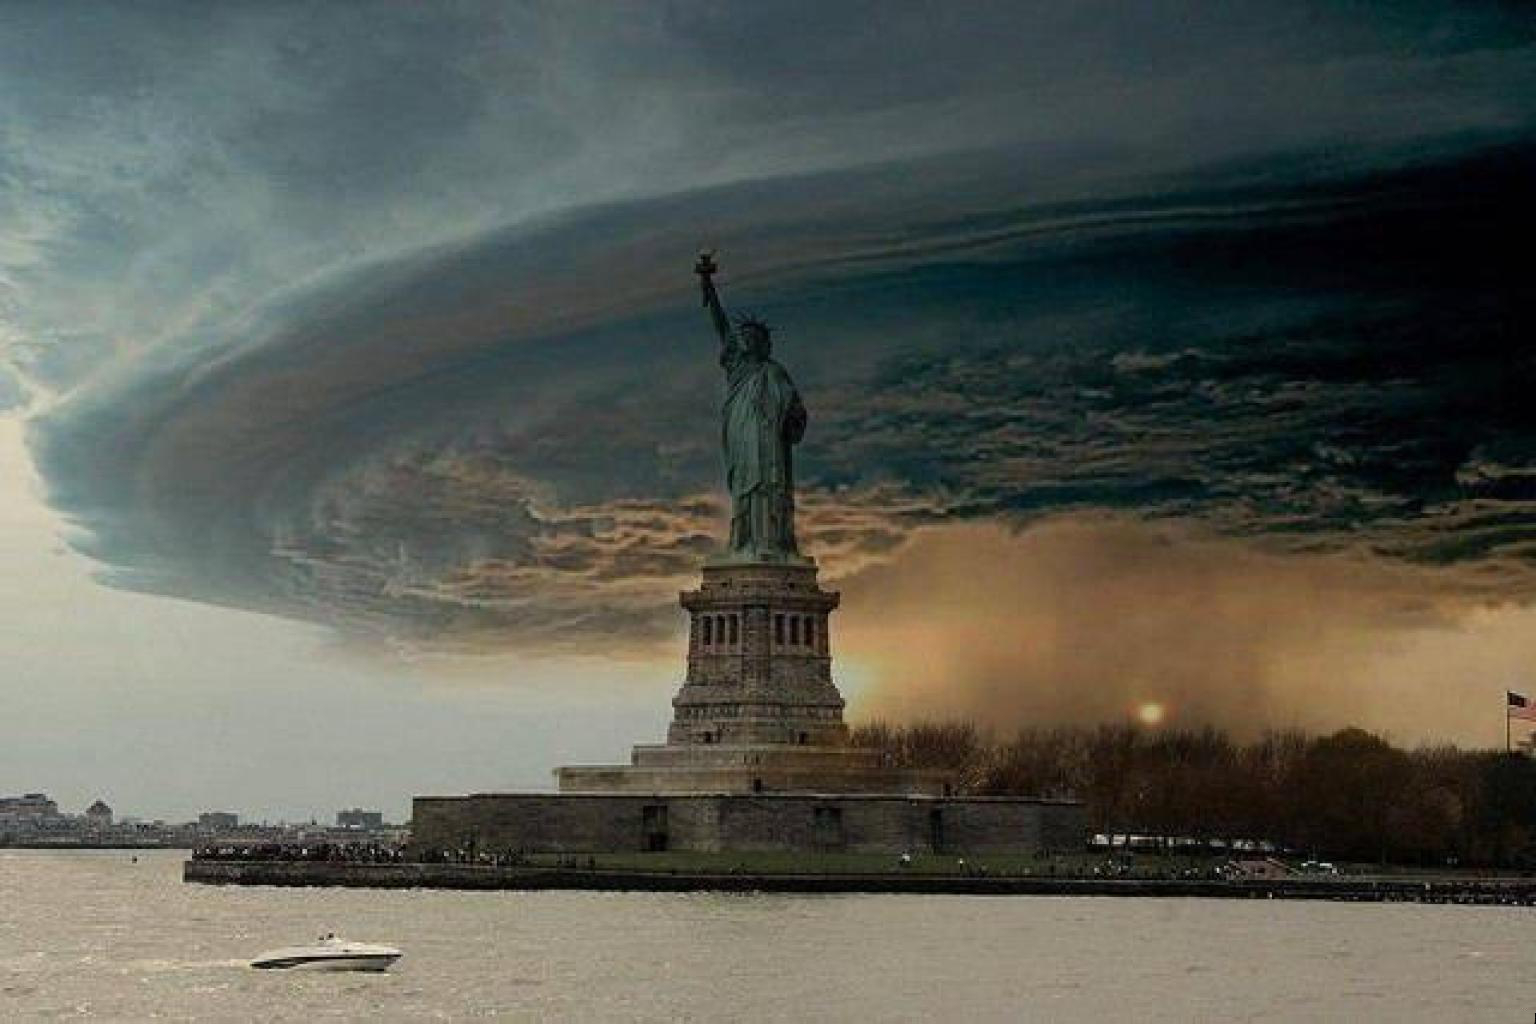 Statue of Liberty in Hurricane Sandy-This is yet another supercell thunderstorm that was superimposed over the Statue of Liberty.